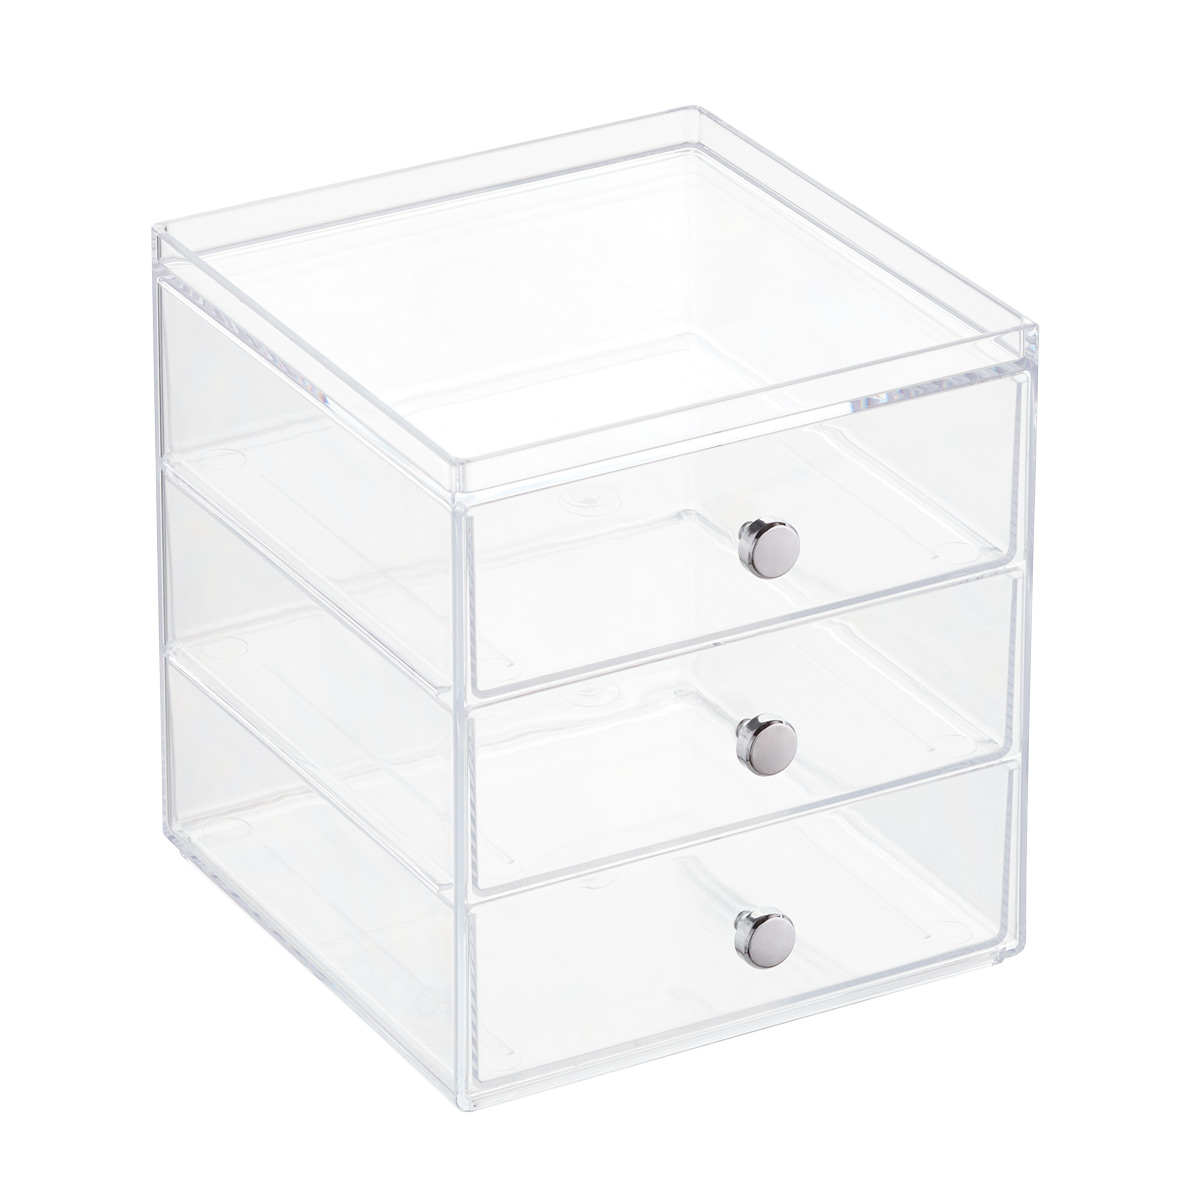 Drawer Storage Insert Made of Plastic iDesign Clarity Organiser/Storage Box for Sorting Small Items Clear 